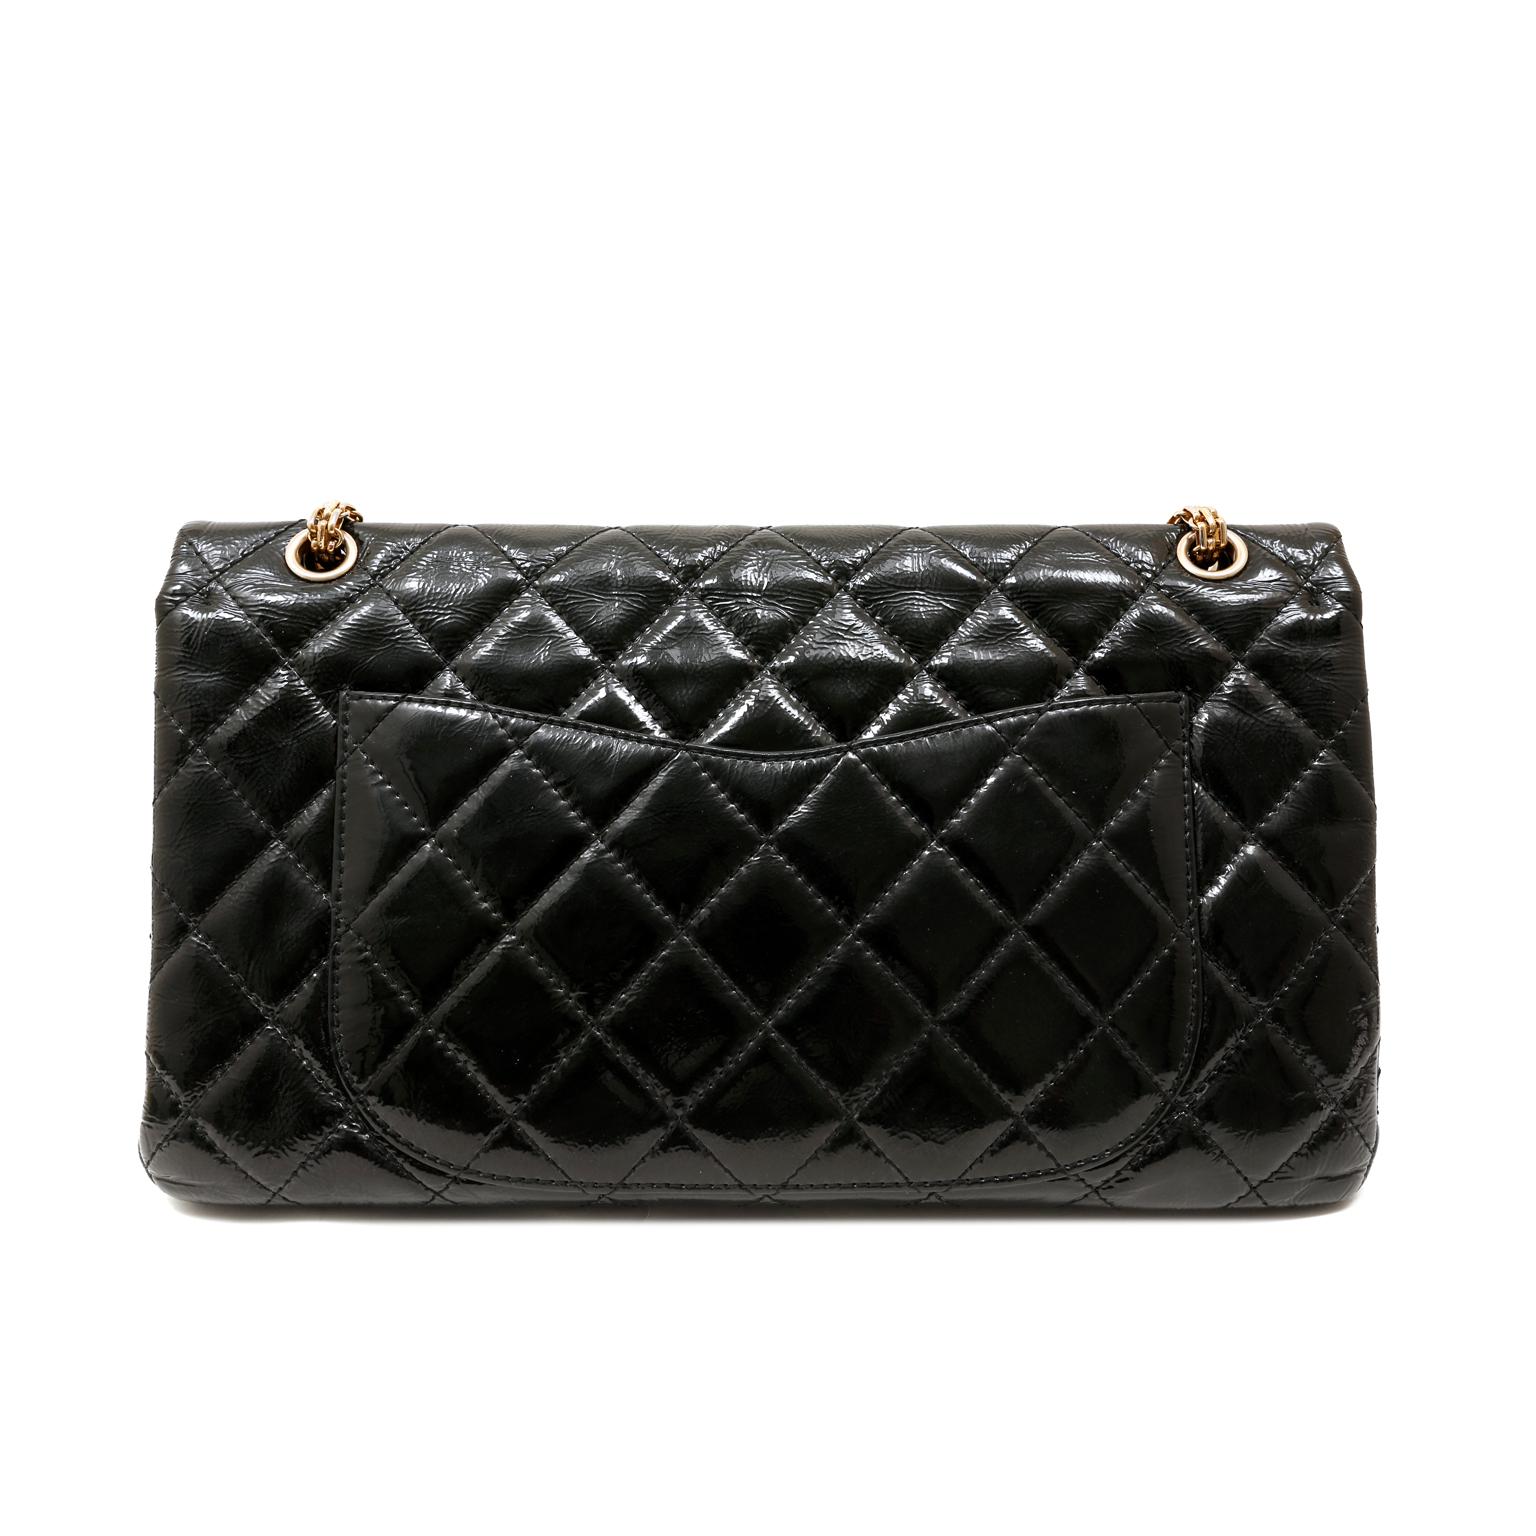 This authentic Chanel Black Patent Leather Reissue Maxi Flap Bag is in excellent condition.  The Maxi, or 228 size, is highly coveted and very collectible.
Black weather friendly patent leather is quilted in signature Chanel diamond pattern.  Gold